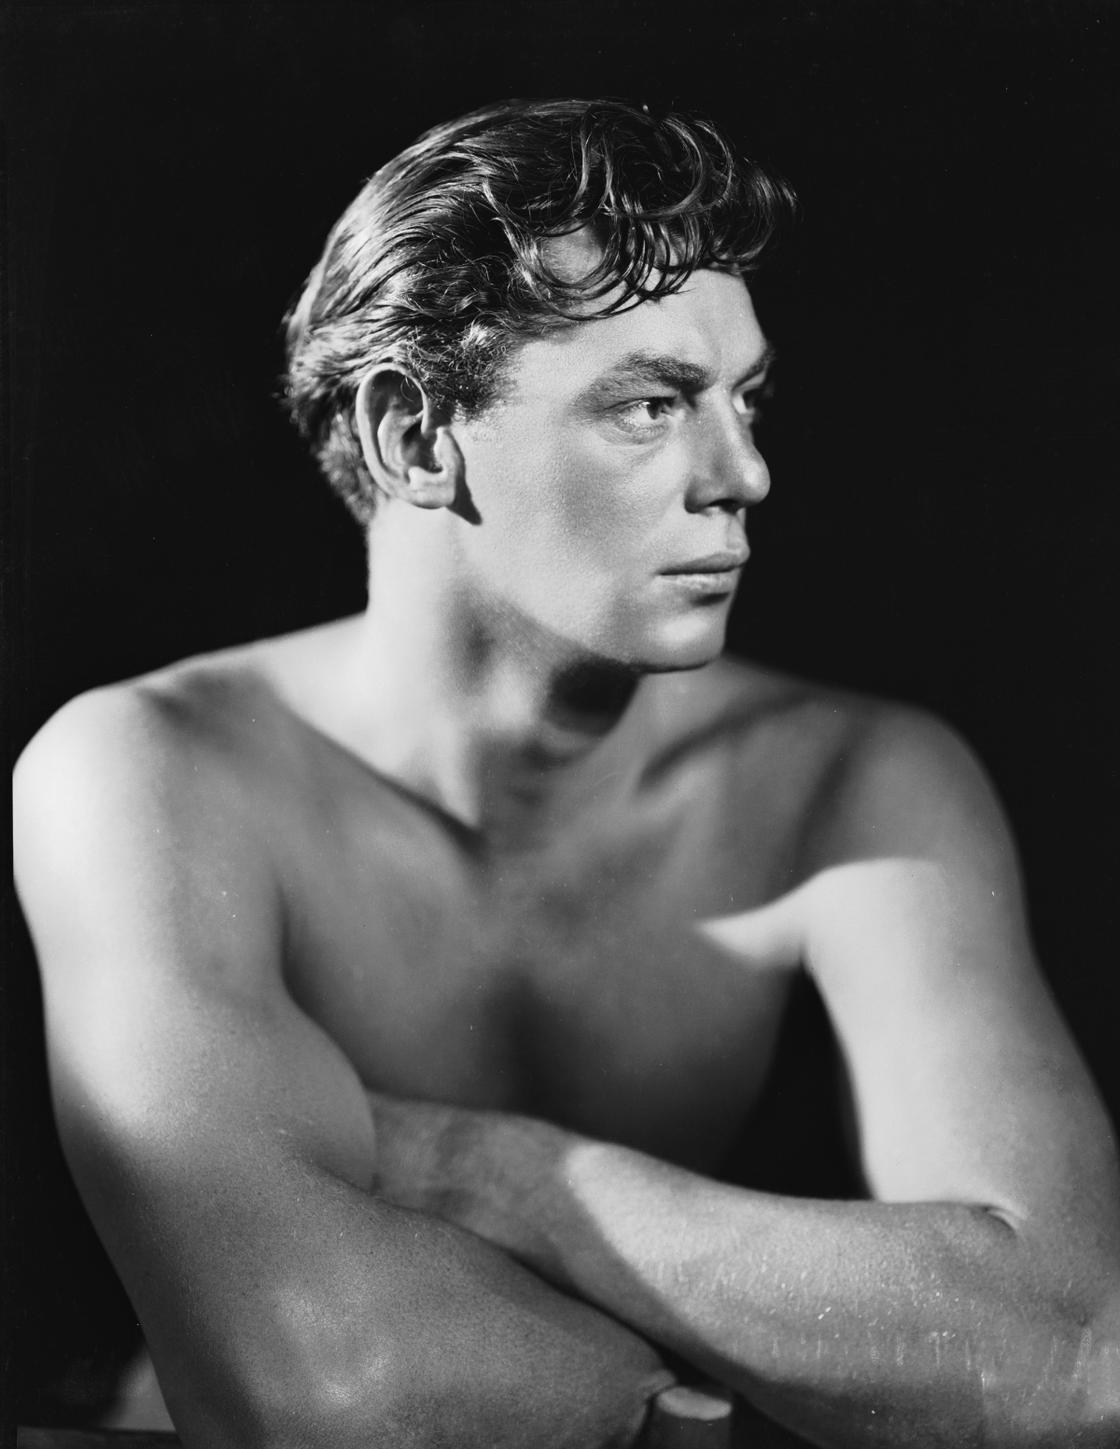 How many people did Johnny Weissmuller save?